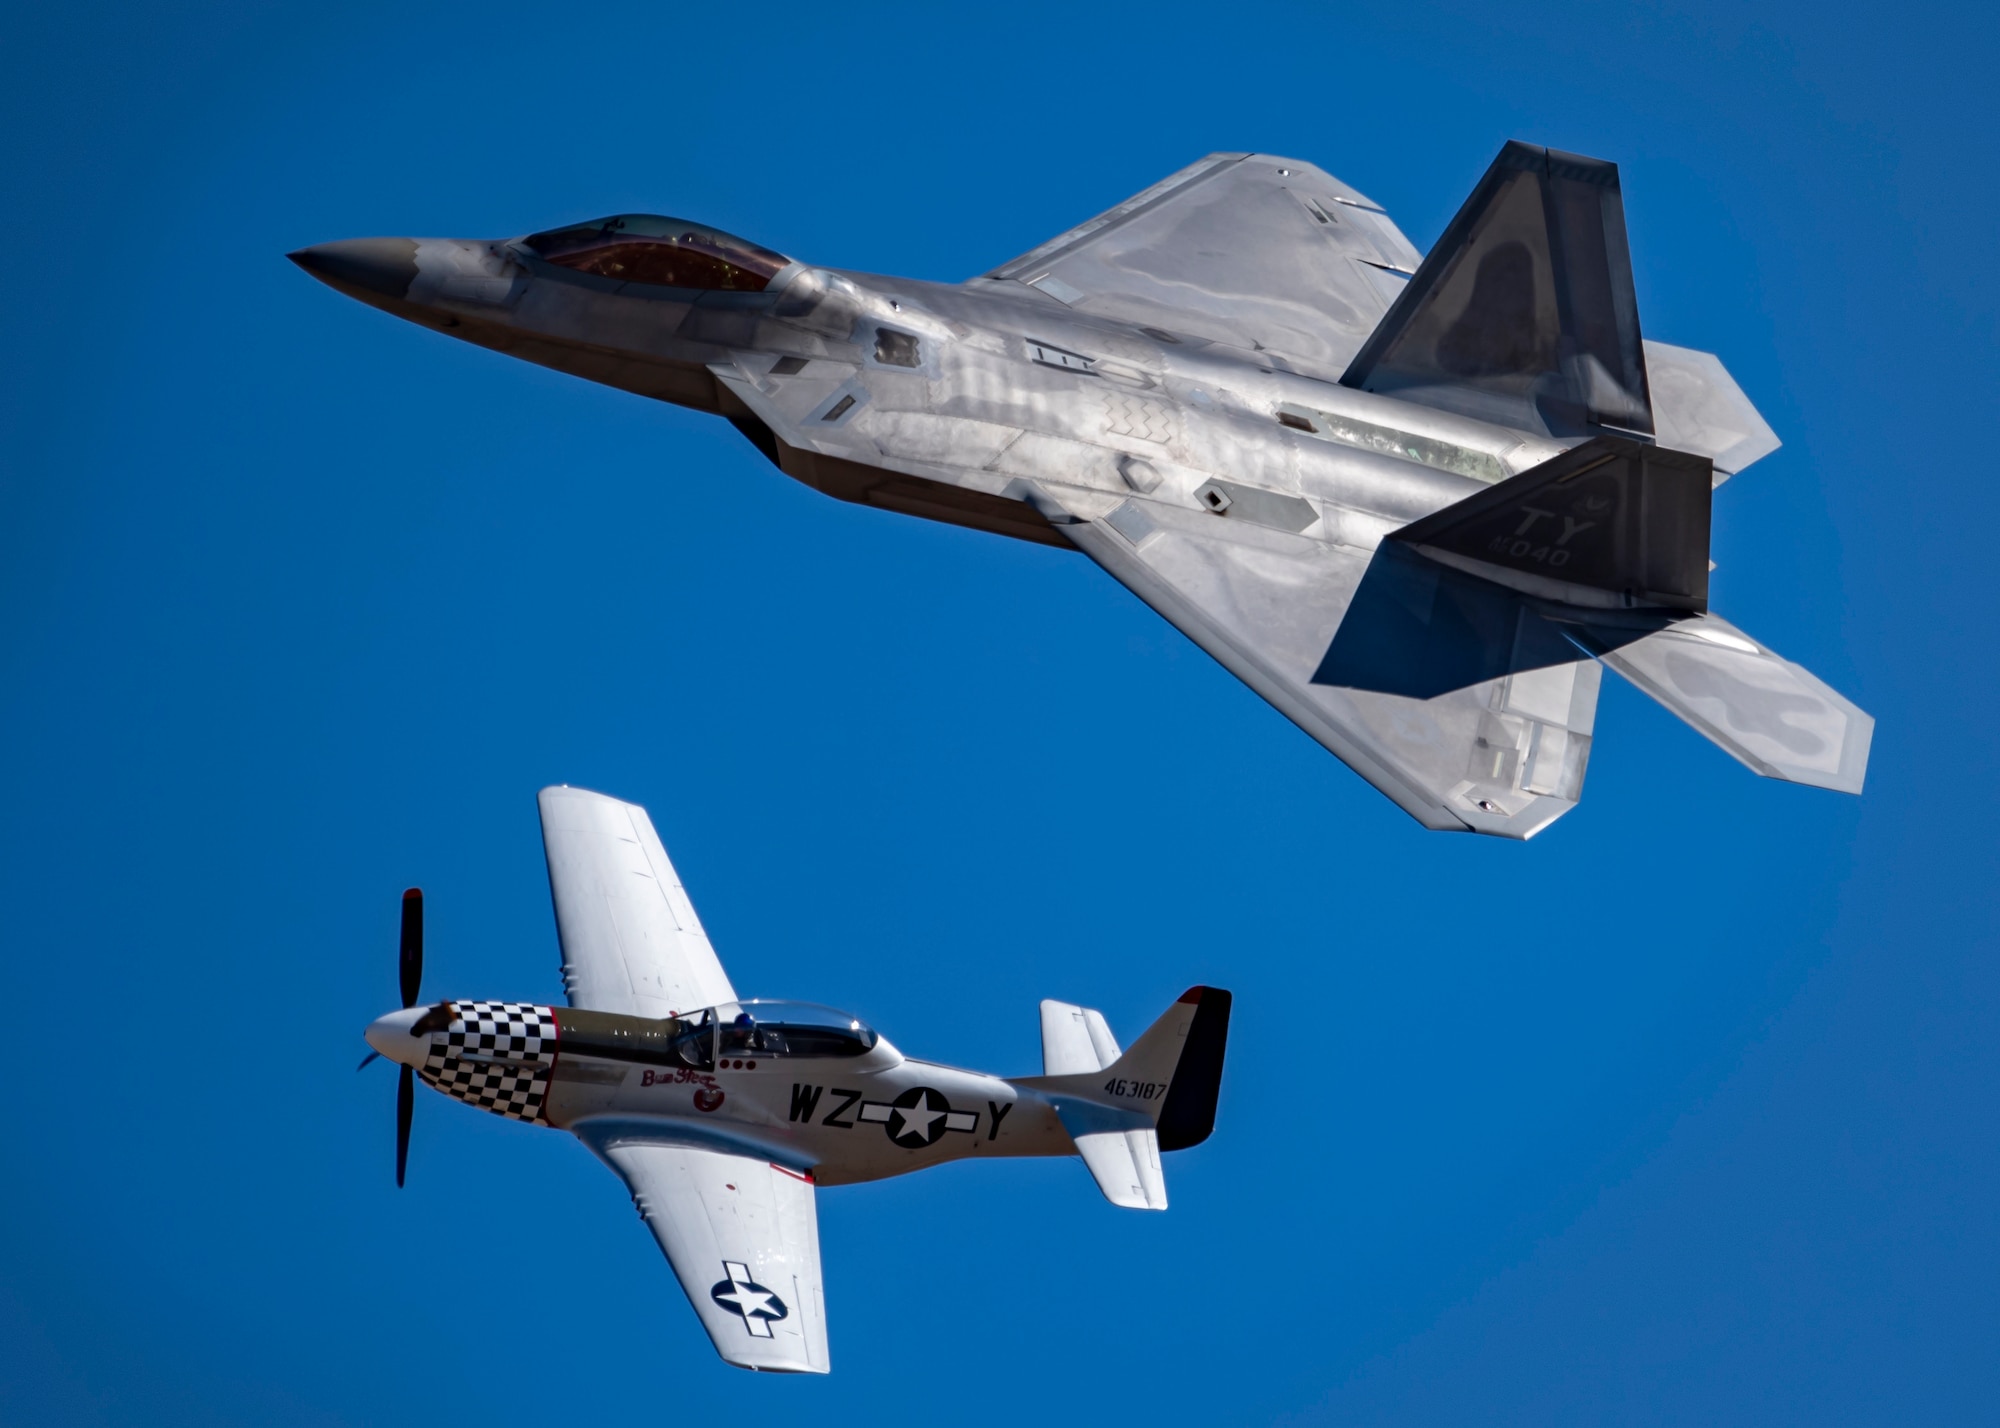 A F-22 Raptor flies alongside a P-51 Mustang during the Sheppard Air Force Base Open House and Air Show at Sheppard AFB, Texas, Oct. 28, 2019. The Air Force Heritage Flight Foundation celebrates U.S. air power history and serves as a living memorial to those who have served in the U.S. Air Force by providing 40-60 annual Heritage Flight demonstrations around the world. (U.S. Air Force photo by Airman 1st Class Pedro Tenorio)